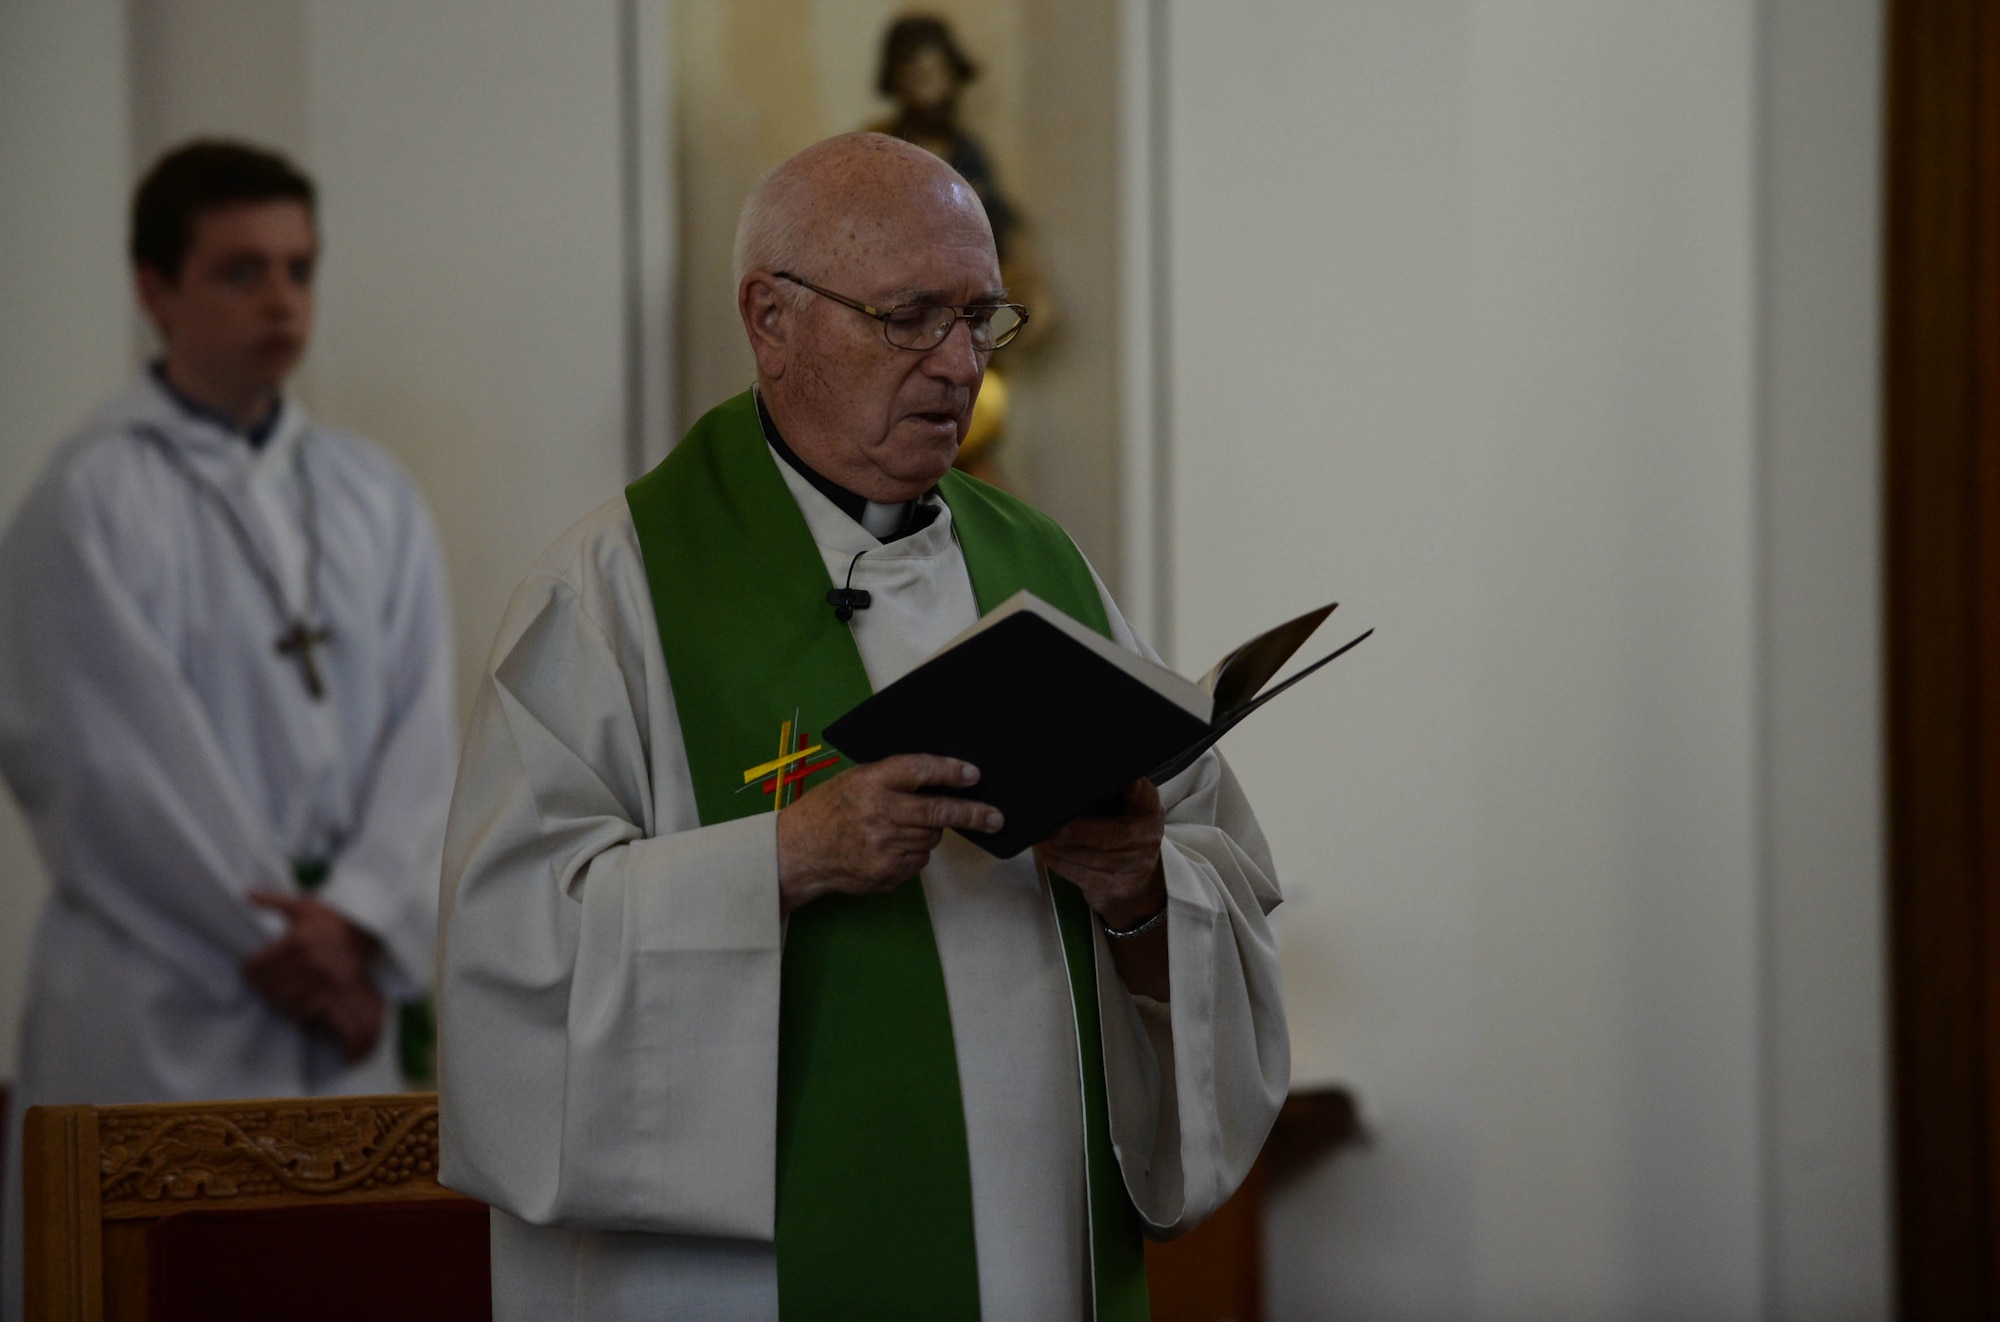 Helmut Pflanz, an auxiliary Catholic priest, reads from the Bible during a service in the chapel at Spangdahlem Air Base, Germany, Aug. 17, 2014.  The chapel provides services to assist people with their spiritual needs. (U.S. Air Force photo by Airman 1st Class Kyle Gese/Released)